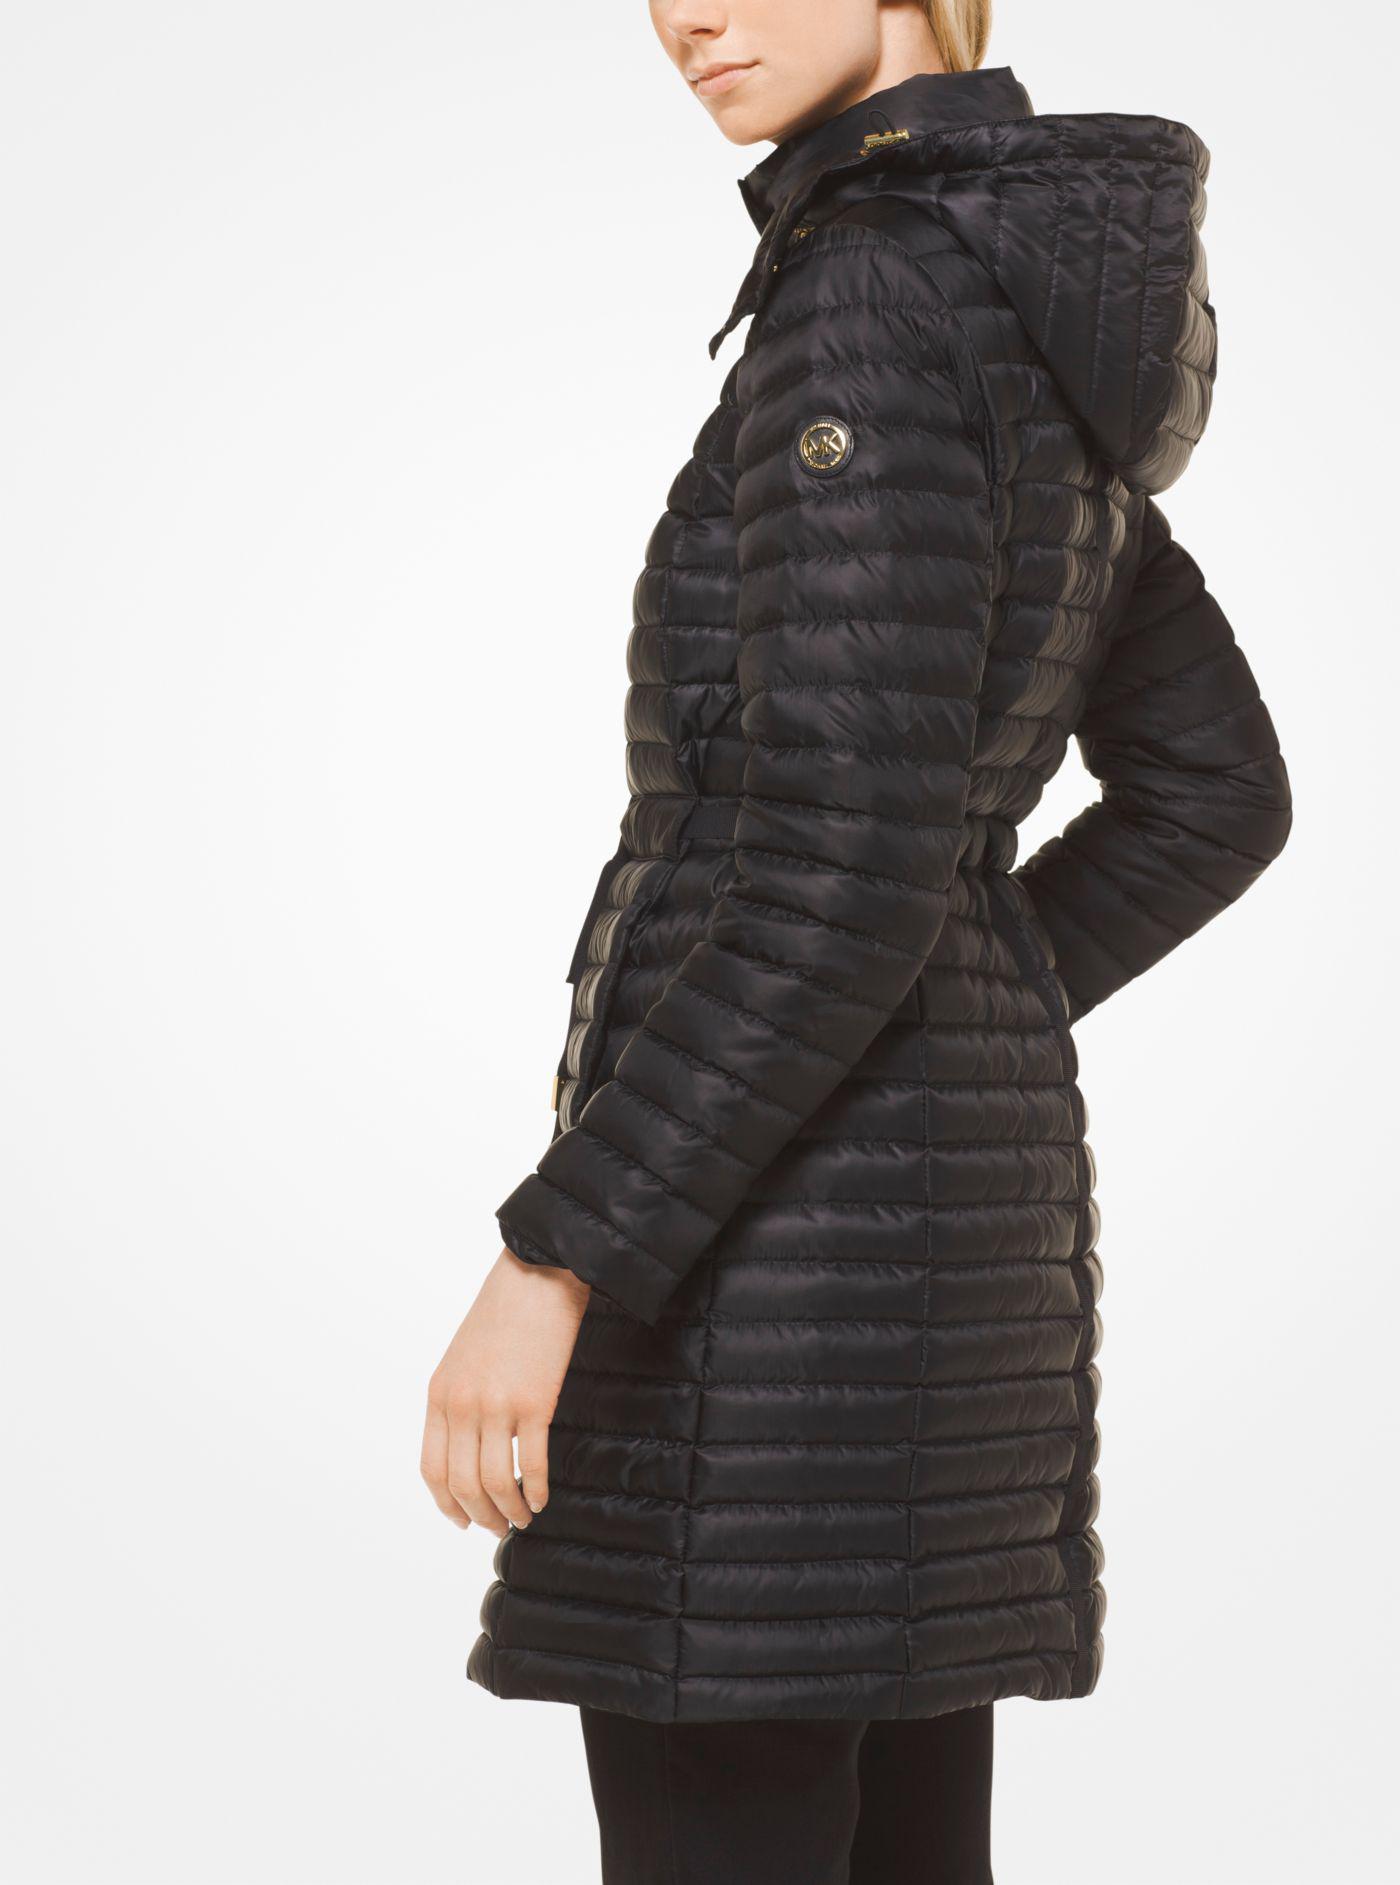 Michael Kors Quilted Satin Puffer in 